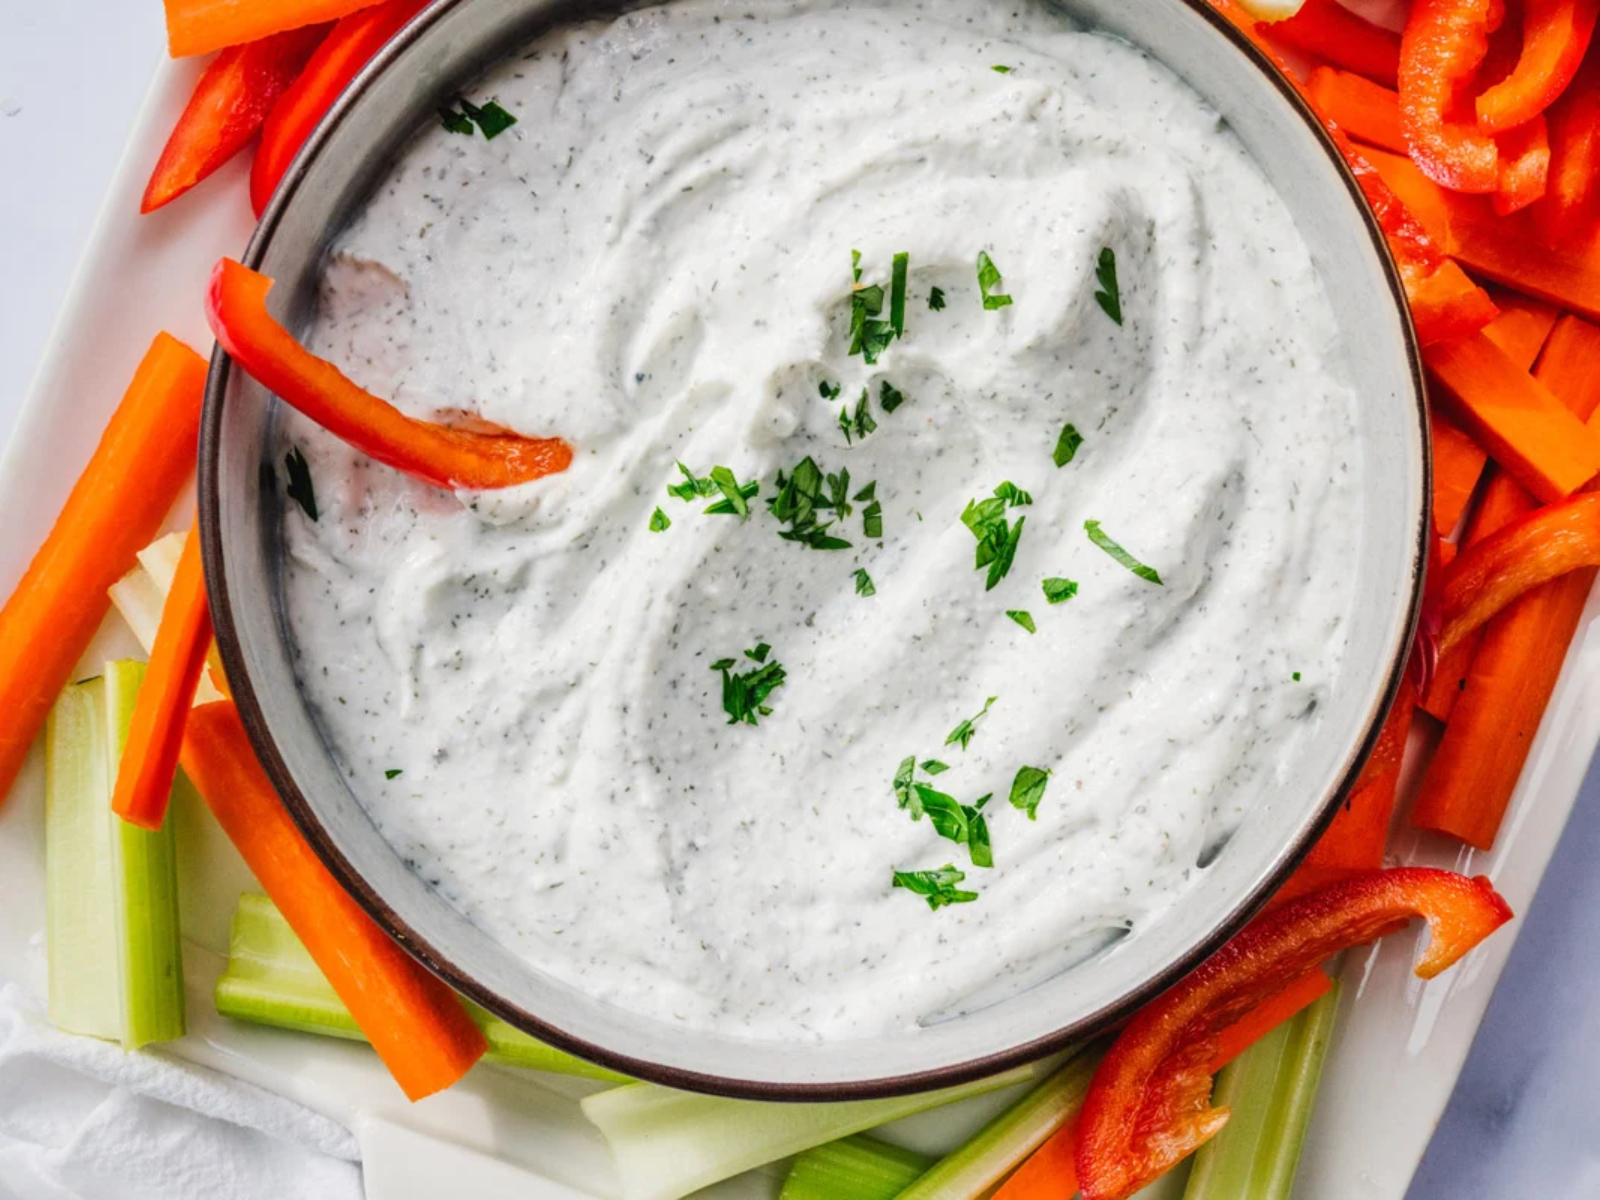 Classic Cottage Cheese Dip